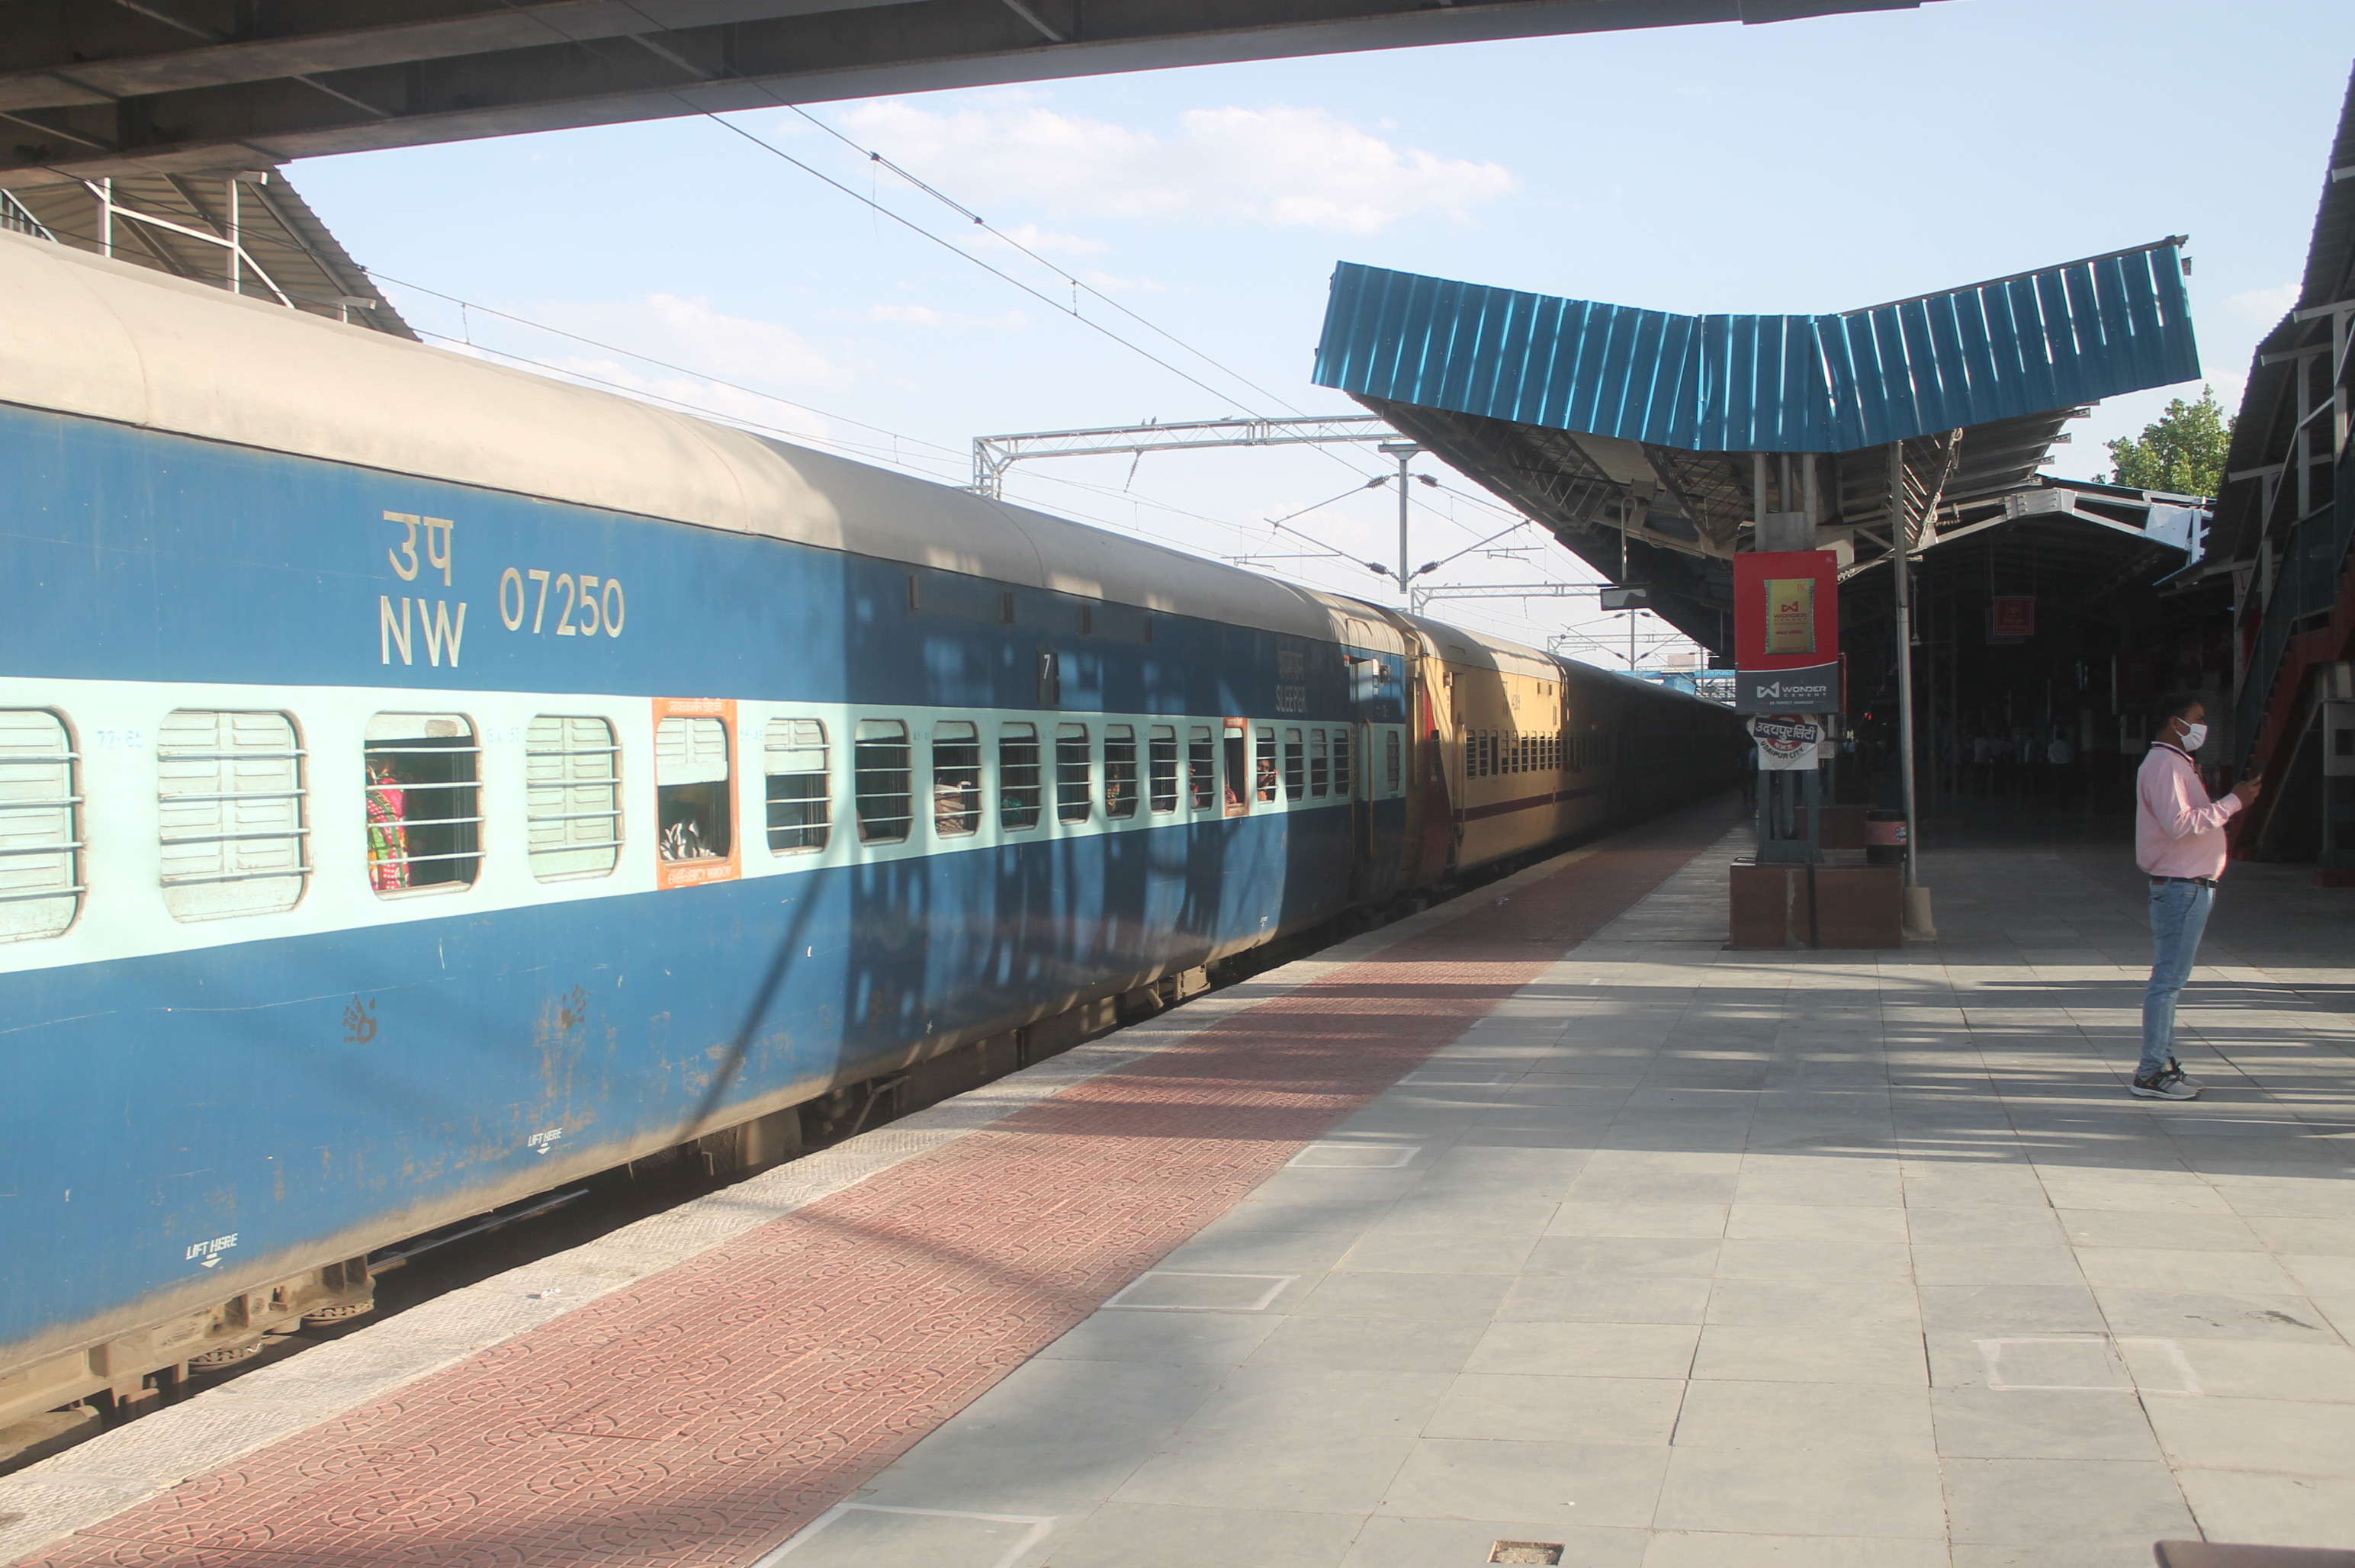 First Shramik Express leaves Udaipur for Muzaffarnagar with 1,200 migrant workers